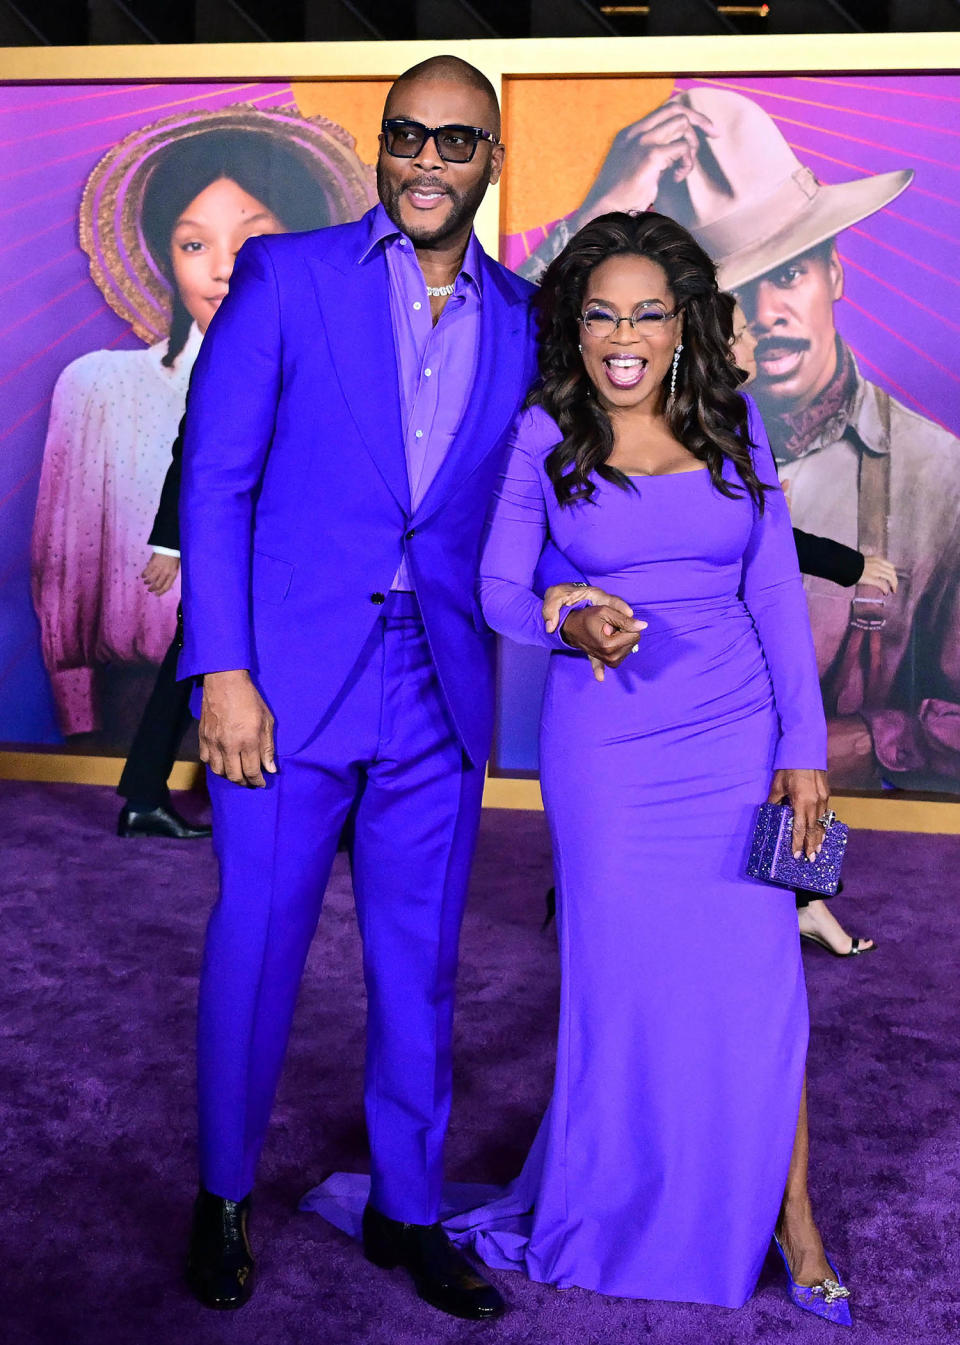 Oprah's sleek new look stuns at 'The Color Purple' premiere. See photos ...